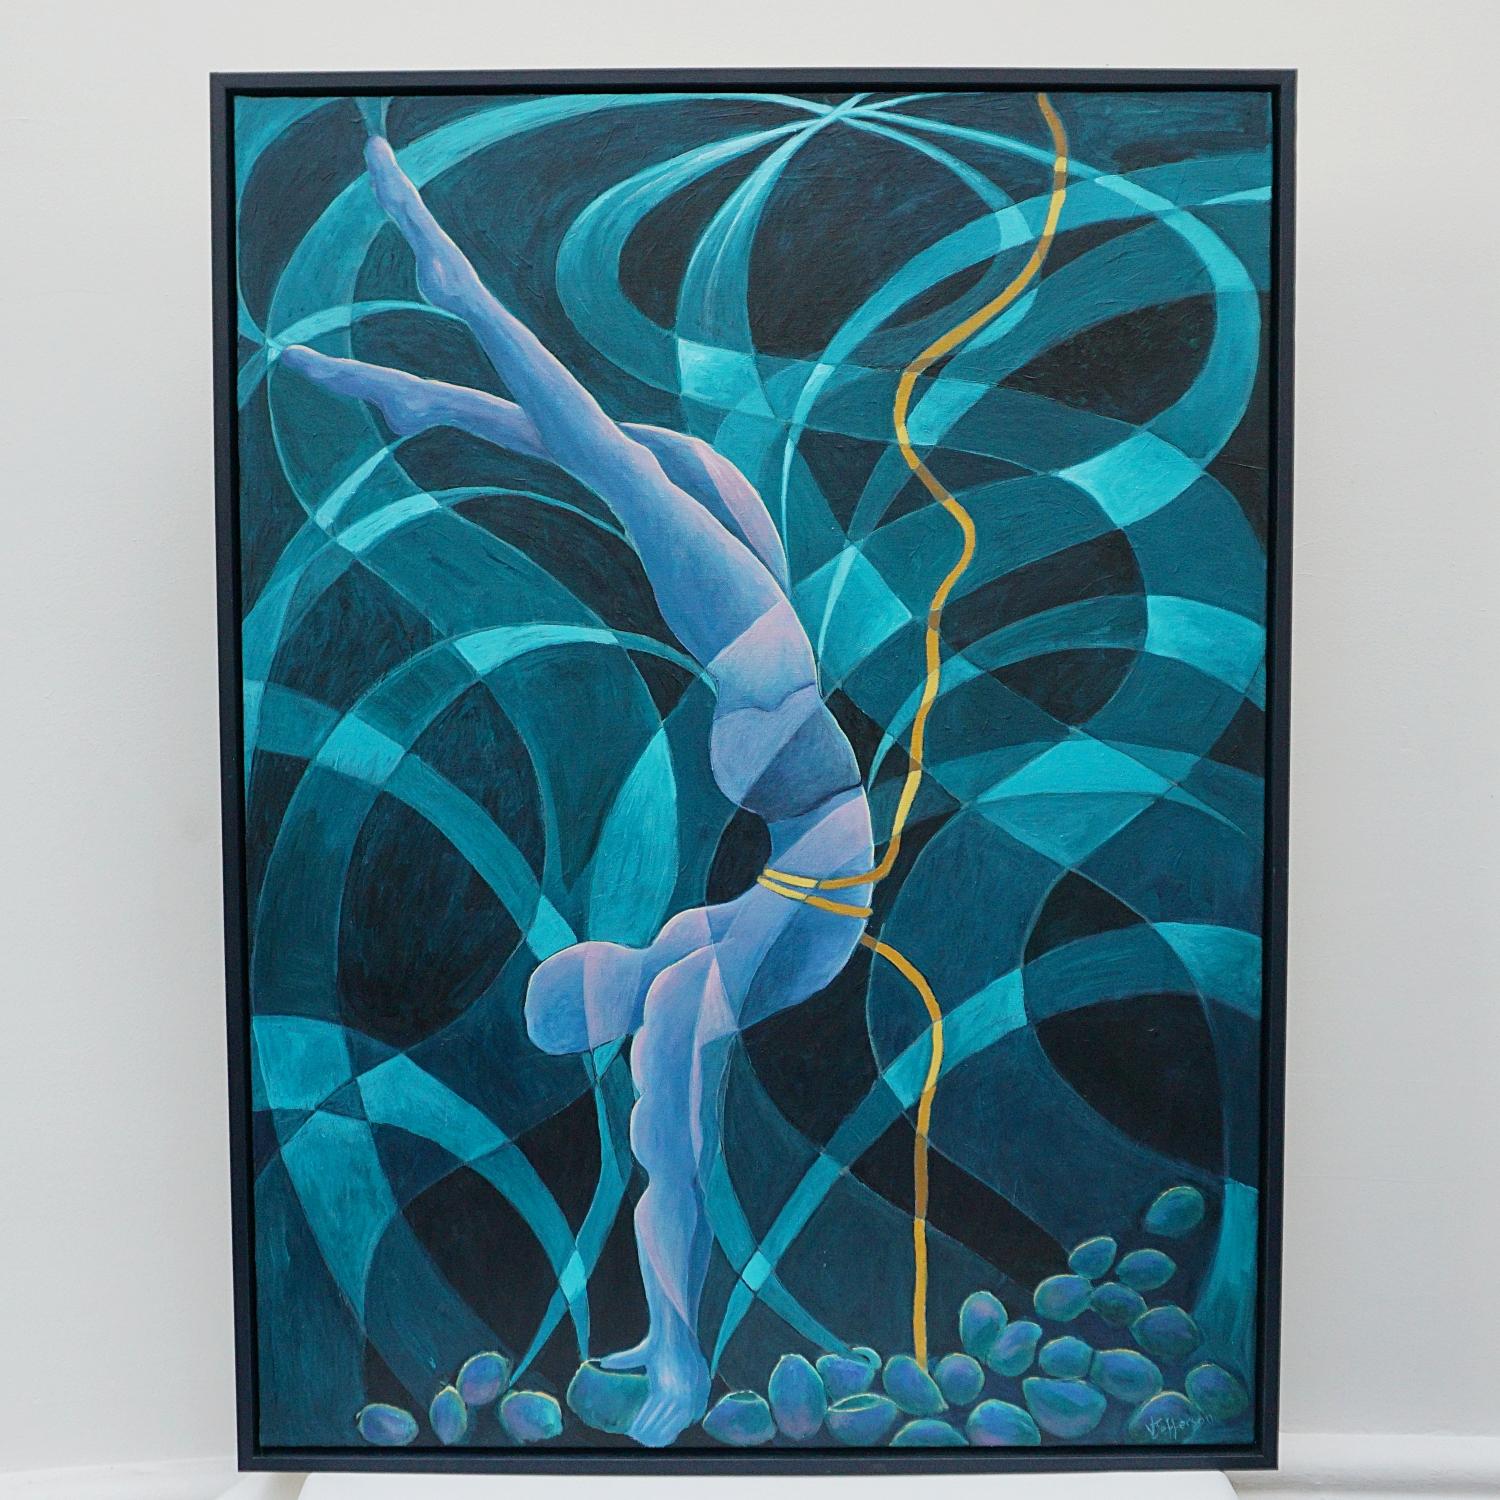 'Pearl Diver' An Art Deco style contemporary painting by Vera Jefferson an athletic diver searching for pearls amongst a stylised background. Signed V Jefferson to lower right. 

Dimensions: H 94cm W 64cm

Vera Jefferson trained at Goldsmiths